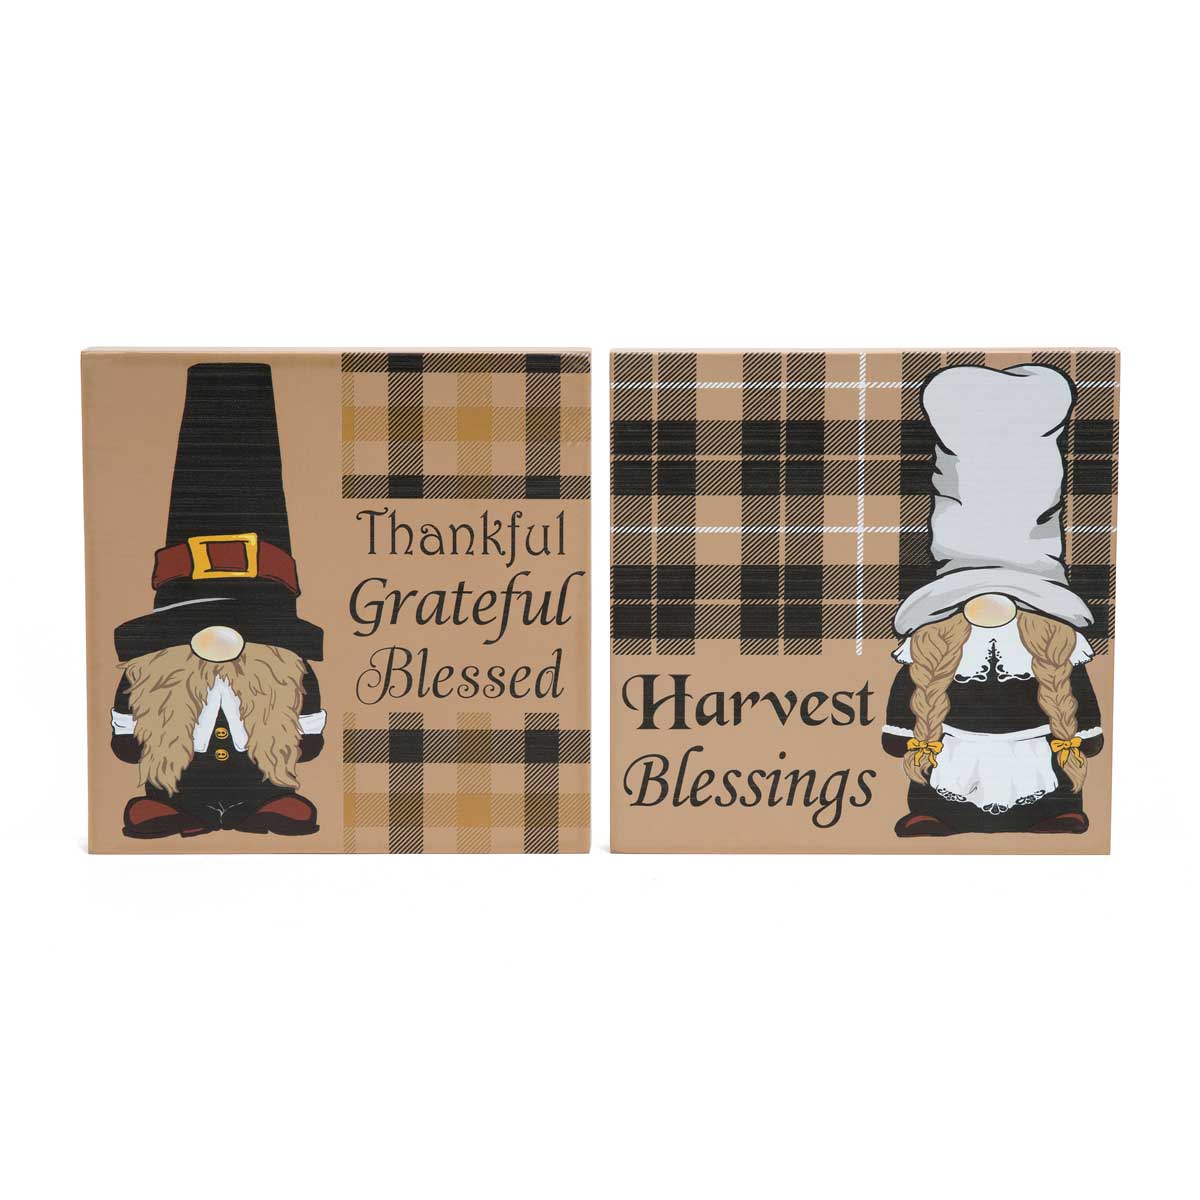 !THANKFUL GRATEFUL BLESSED WOOD BLOCK SIGN